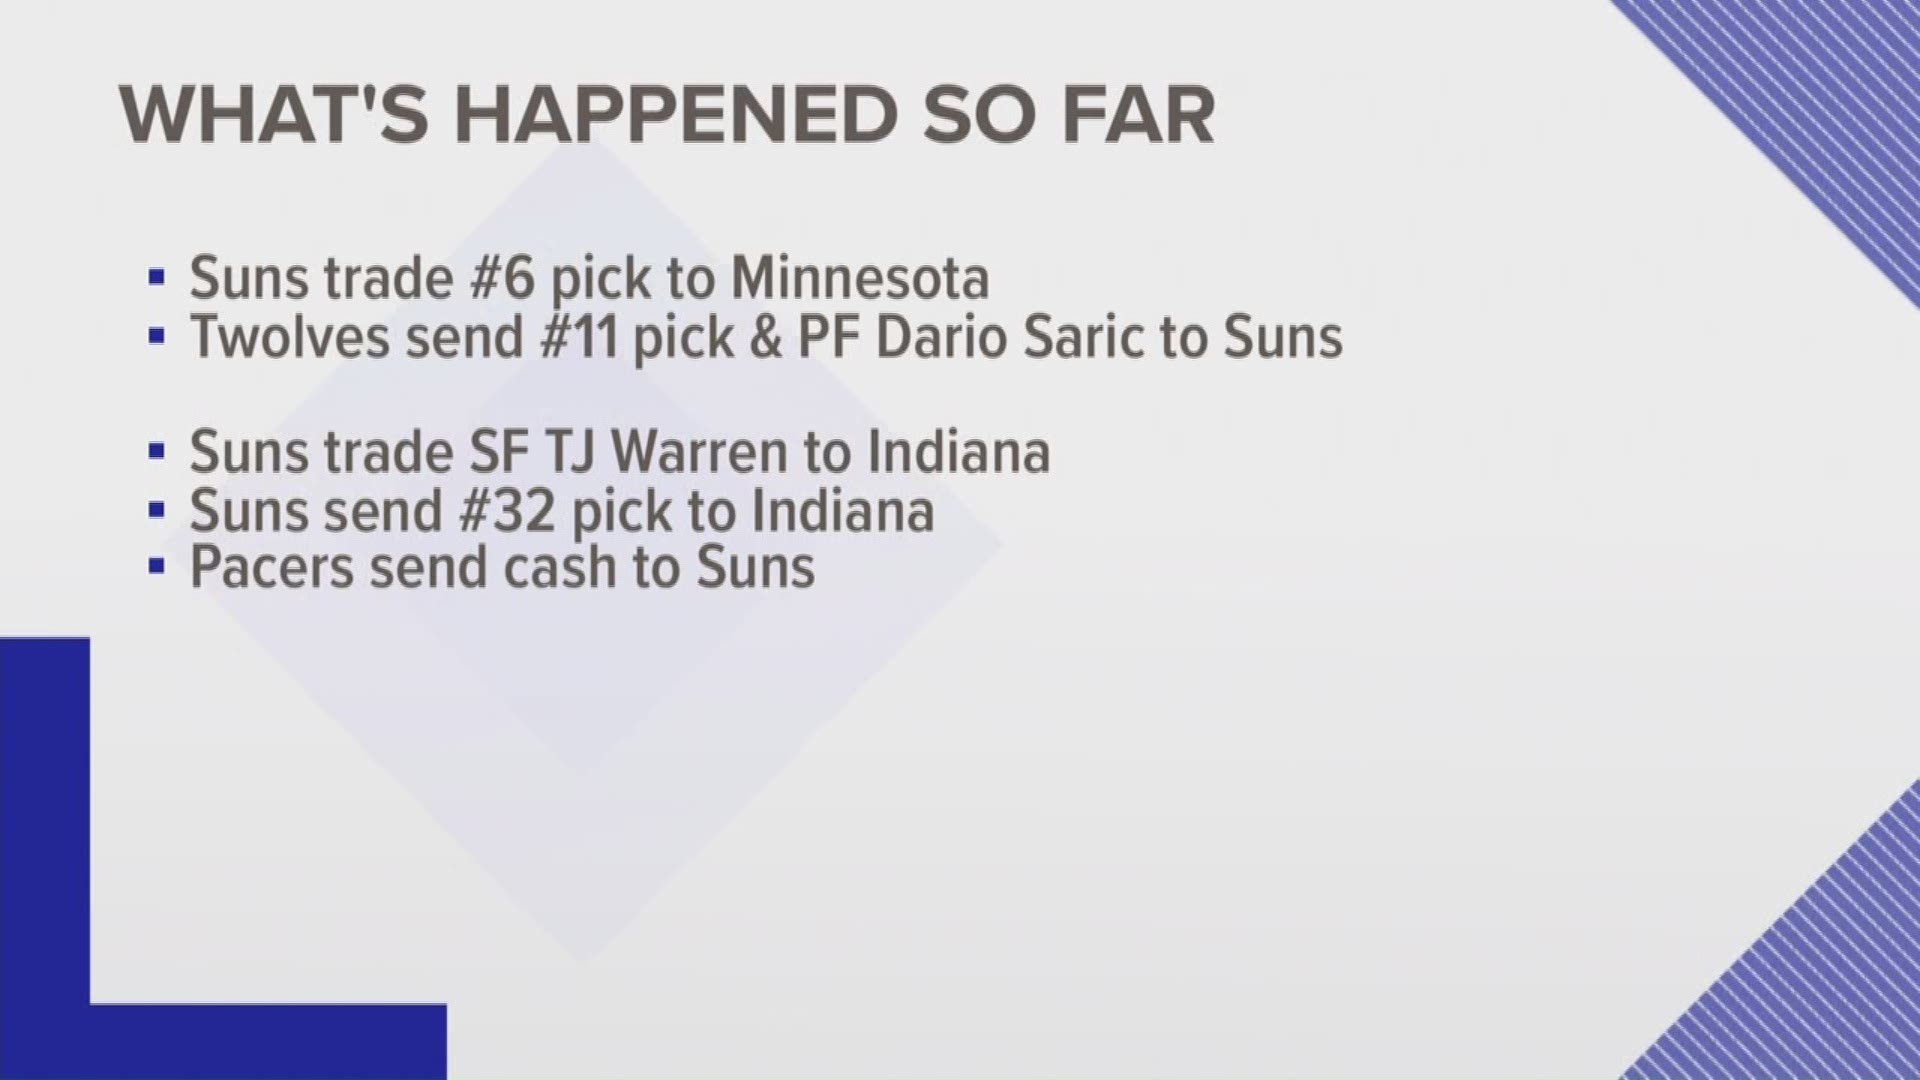 The Suns are making moves to advance the 2019-2020 season. On draft day the Suns traded the 6th pick to Minnesota for the 11th pick and power forward Dario Saric. They also dumped some salary by trading away TJ Warren and the 32nd pick in the draft to the Indiana Pacers for cash.